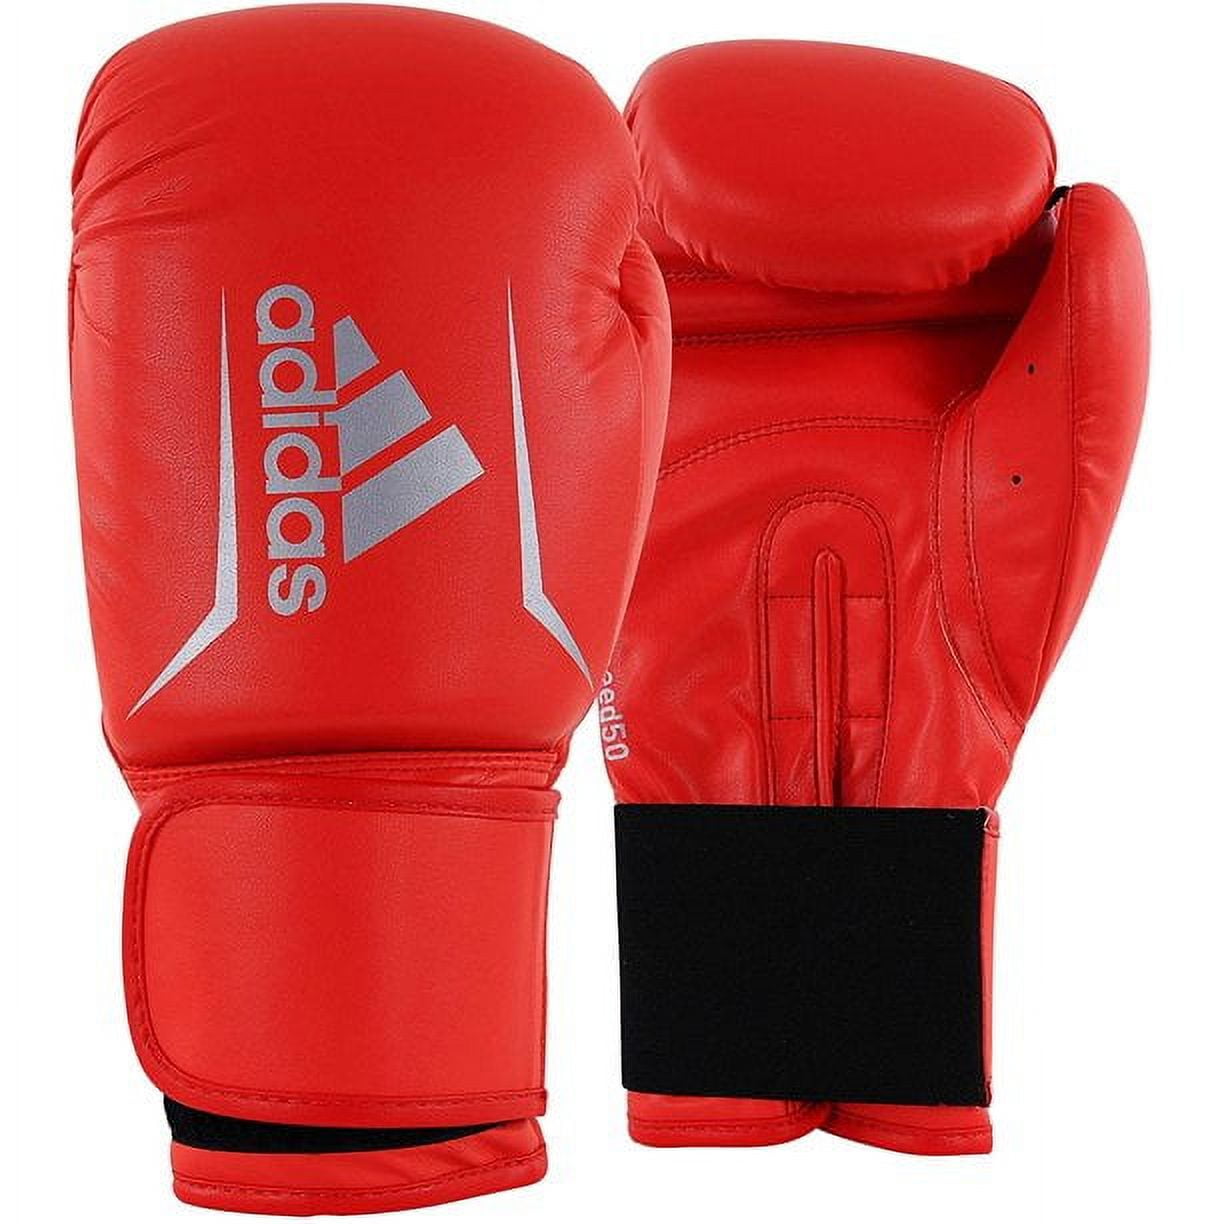 adidas FLX 3.0 Speed 50 Boxing & Kickboxing Gloves for Women and Men for  Light Sparring, Training, Gym, Punching, Fitness and Heavy Bags. 12oz Solar  Red, Silver